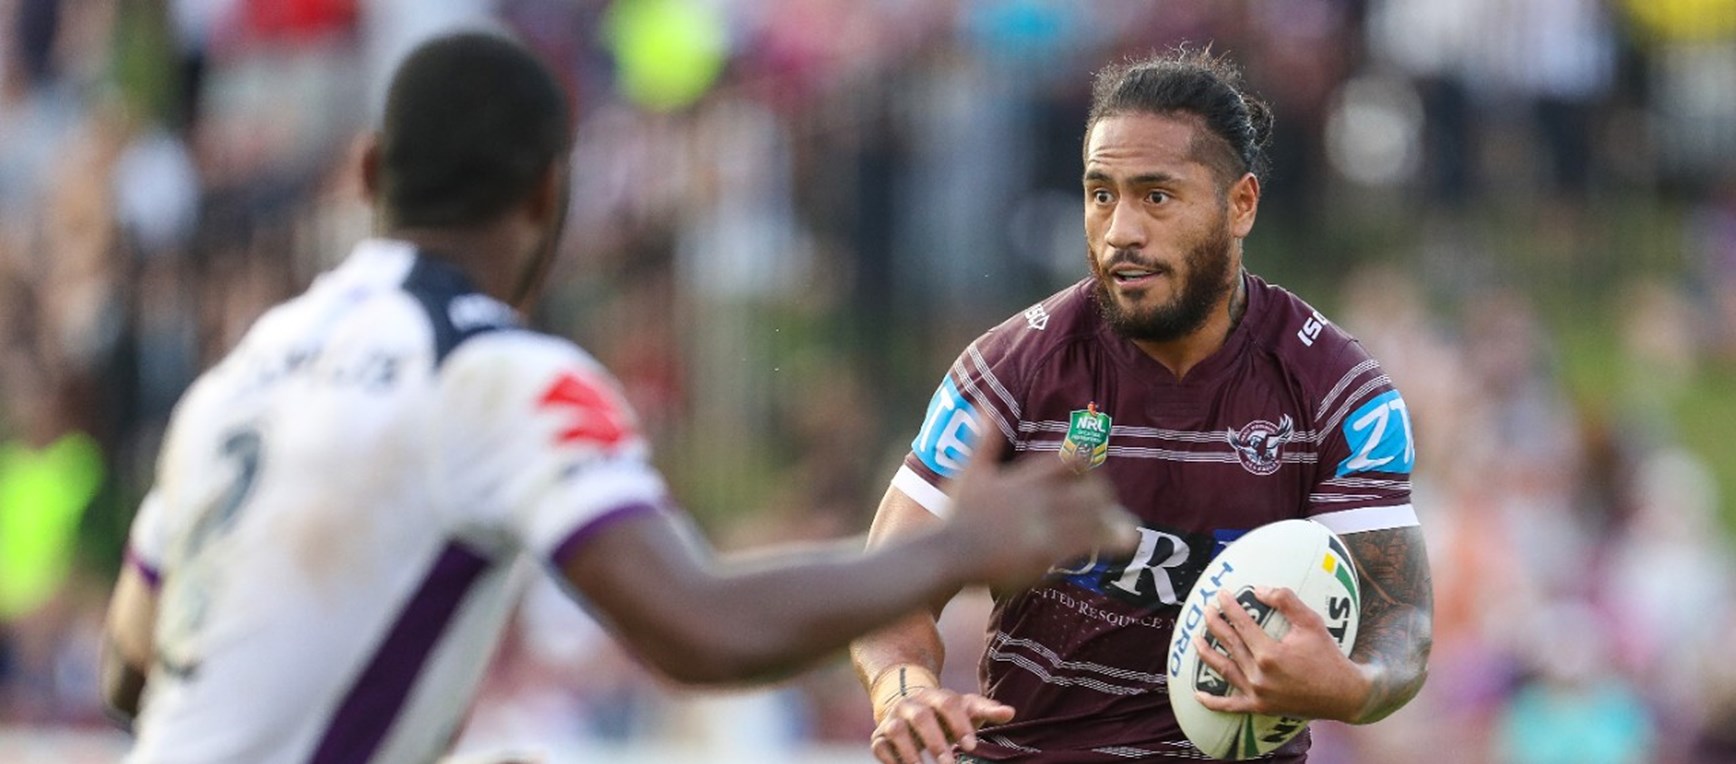 Gallery | Manly v Storm 